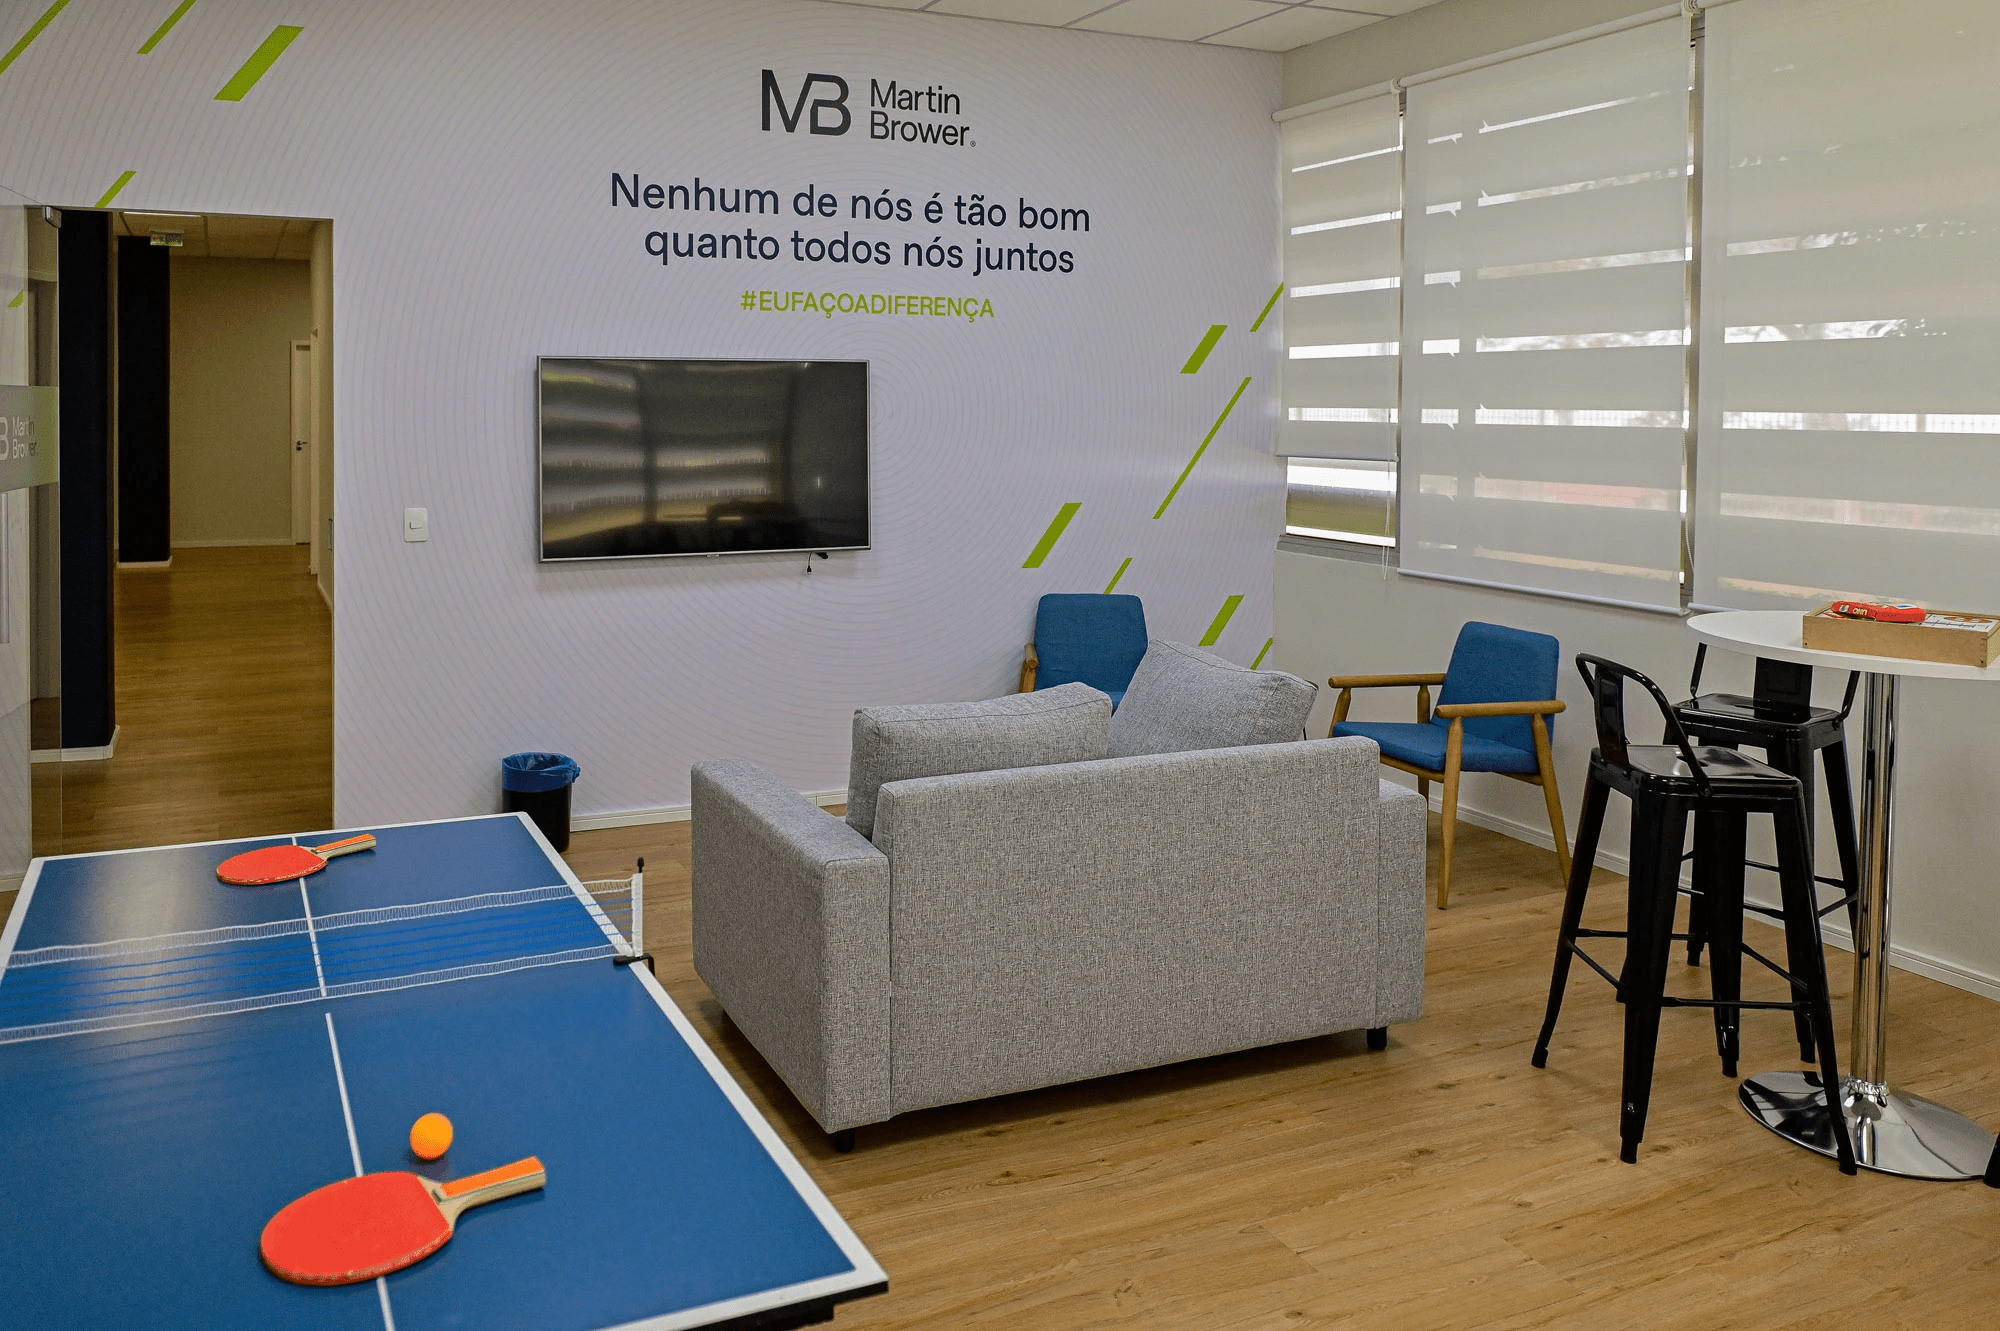 A small break area in the production facility - a sofa, chairs, a wall-mounted TV, and a ping-pong table in the corner